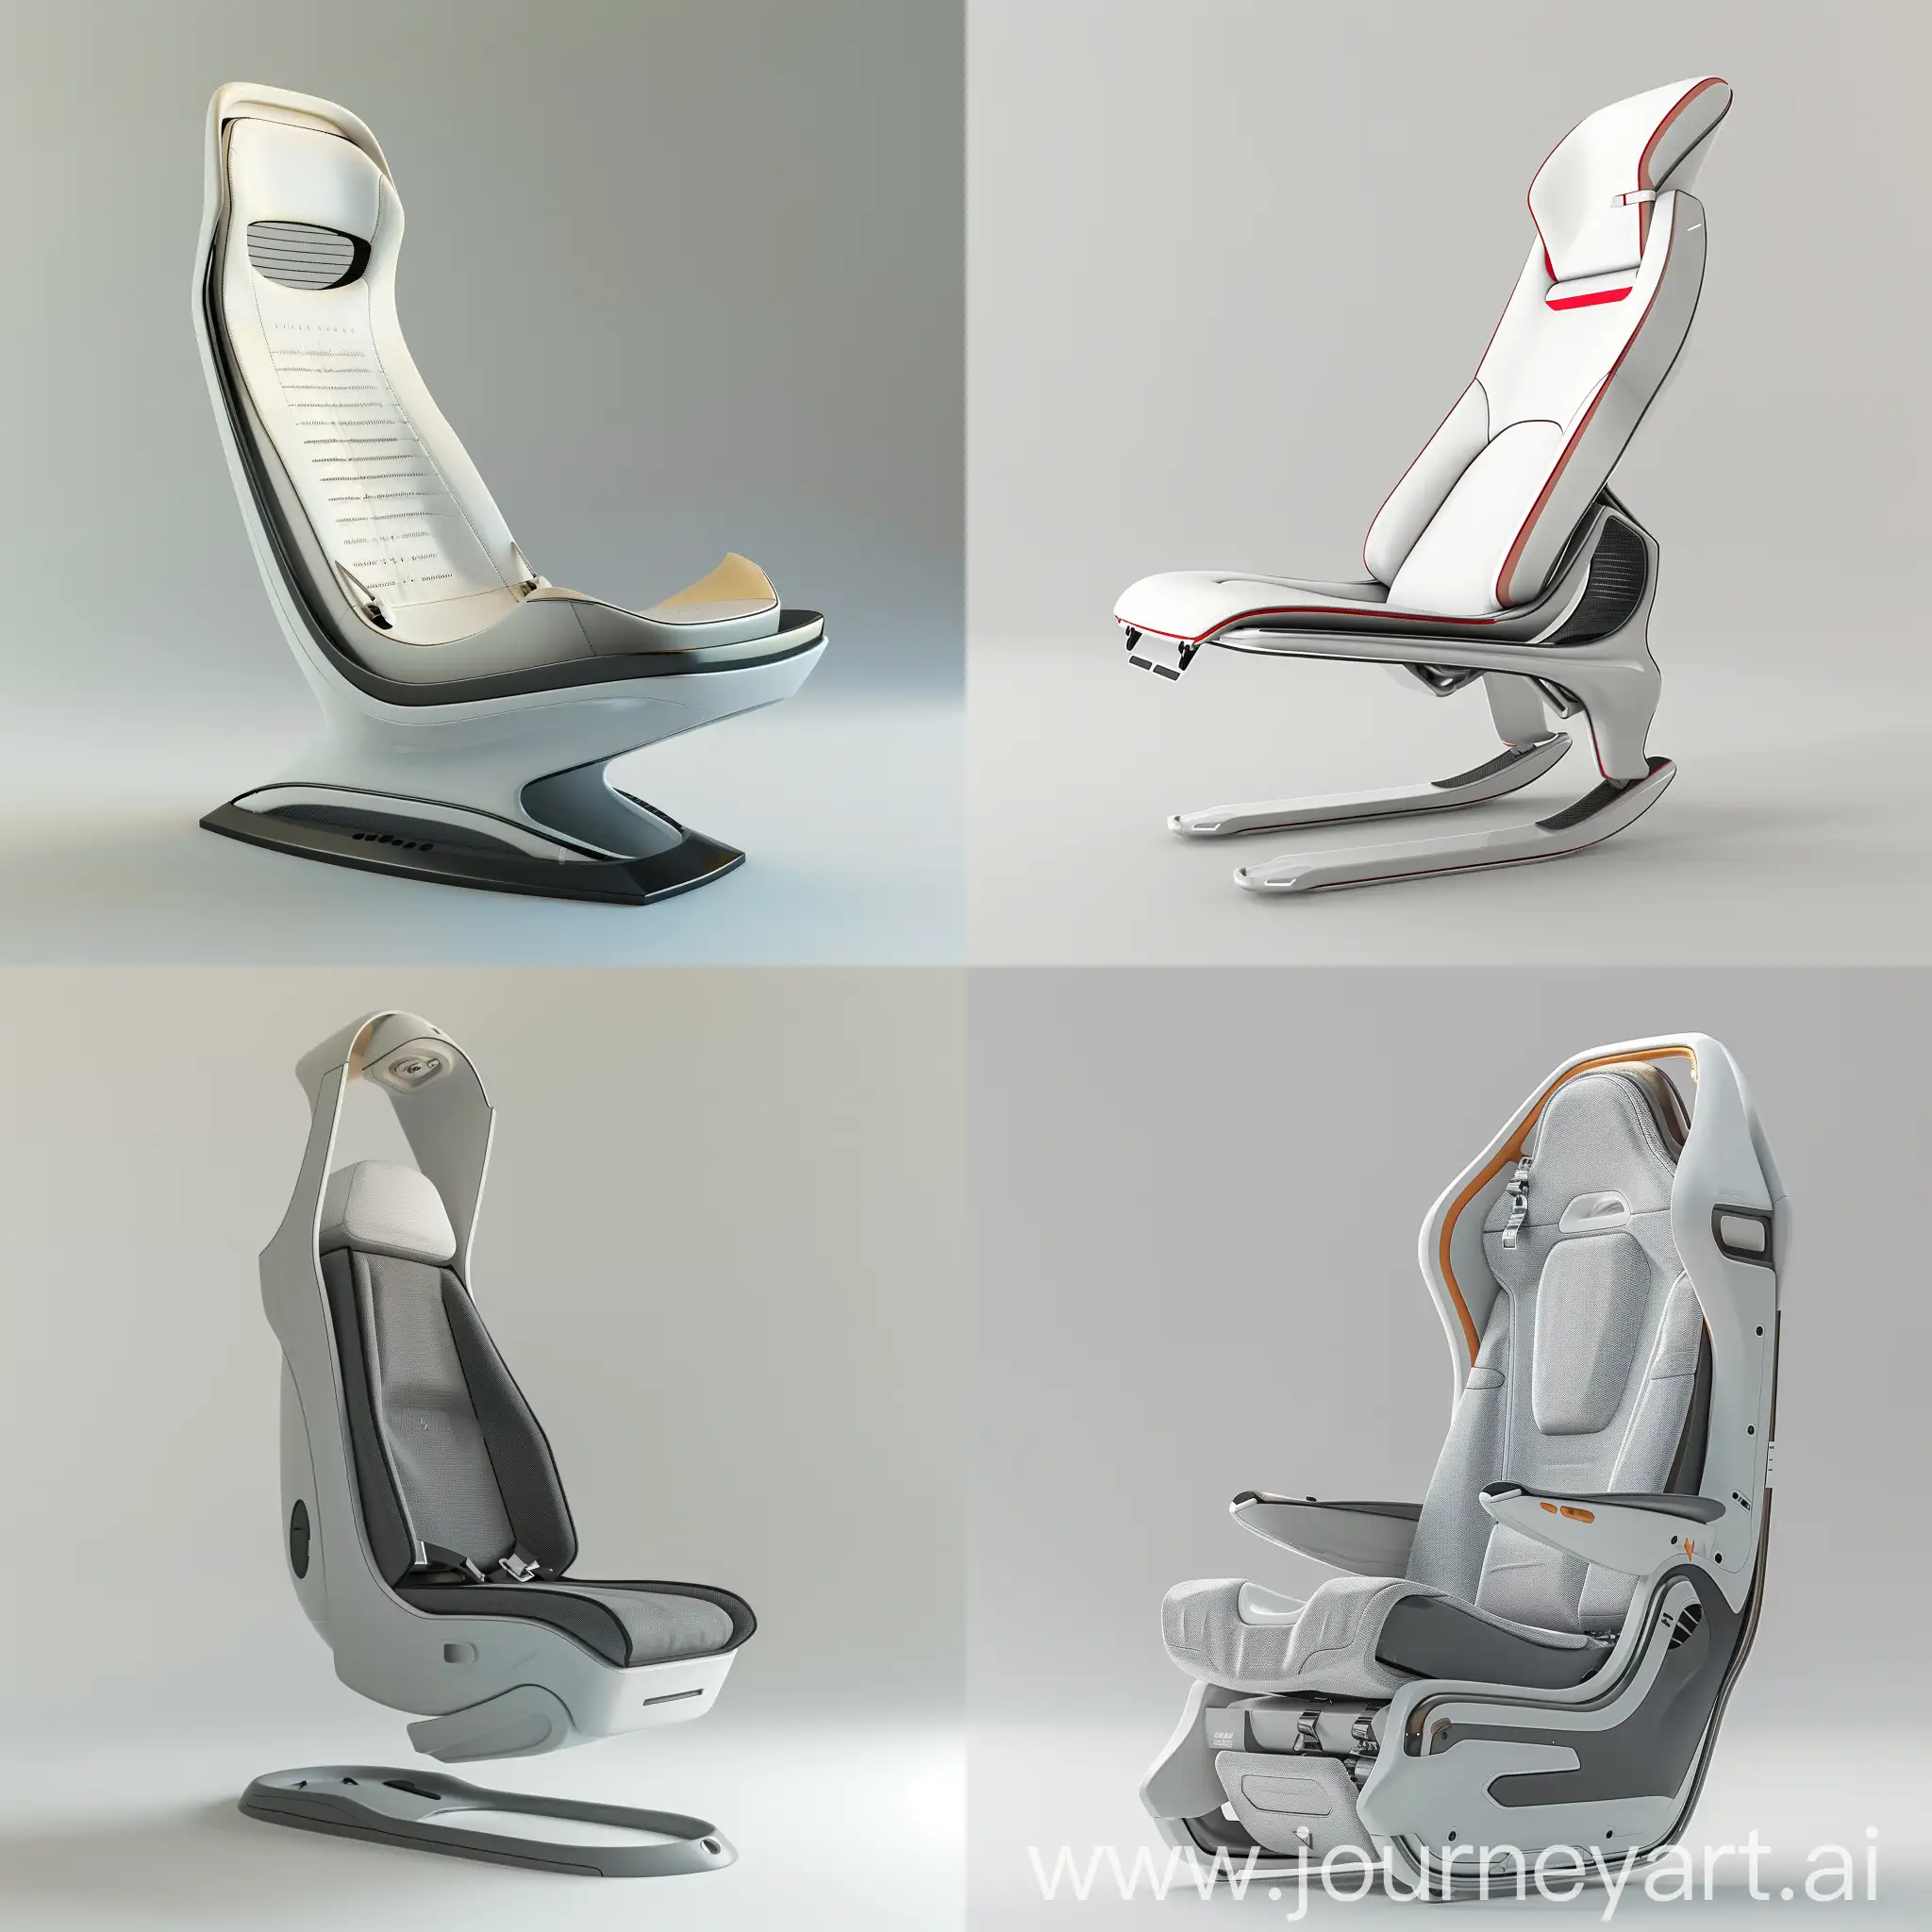 Aircraft seat design, thin and light, portable head, realistic render